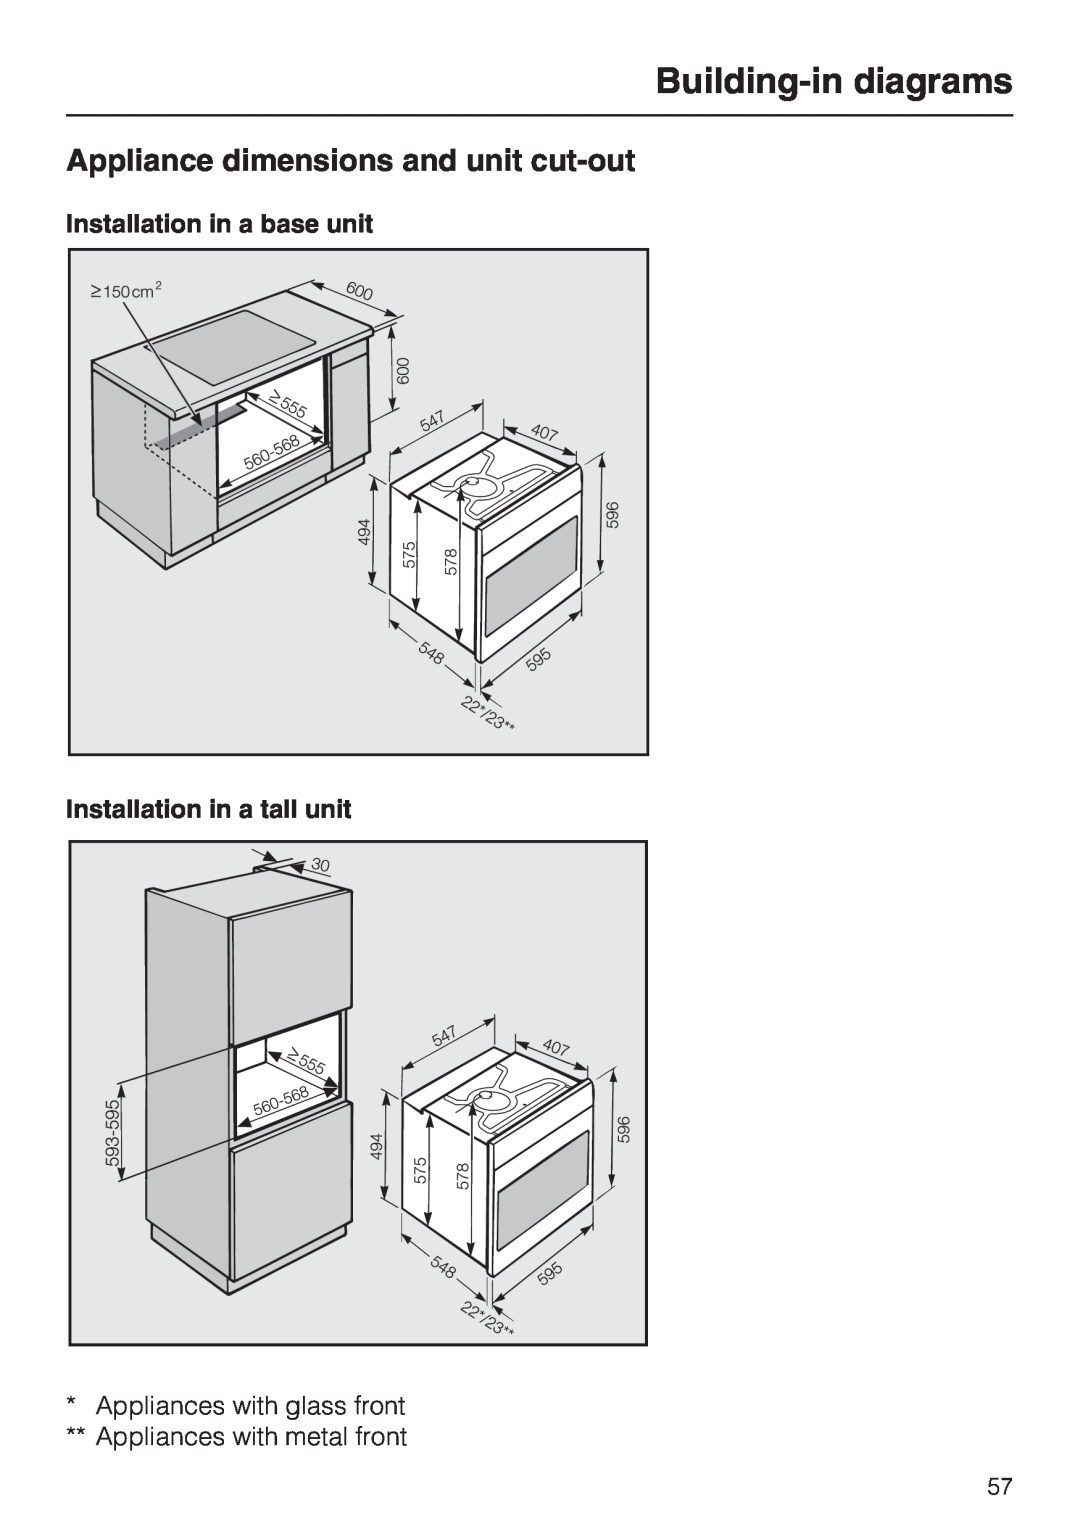 Miele H 5460-BP Building-indiagrams, Appliance dimensions and unit cut-out, Installation in a base unit 